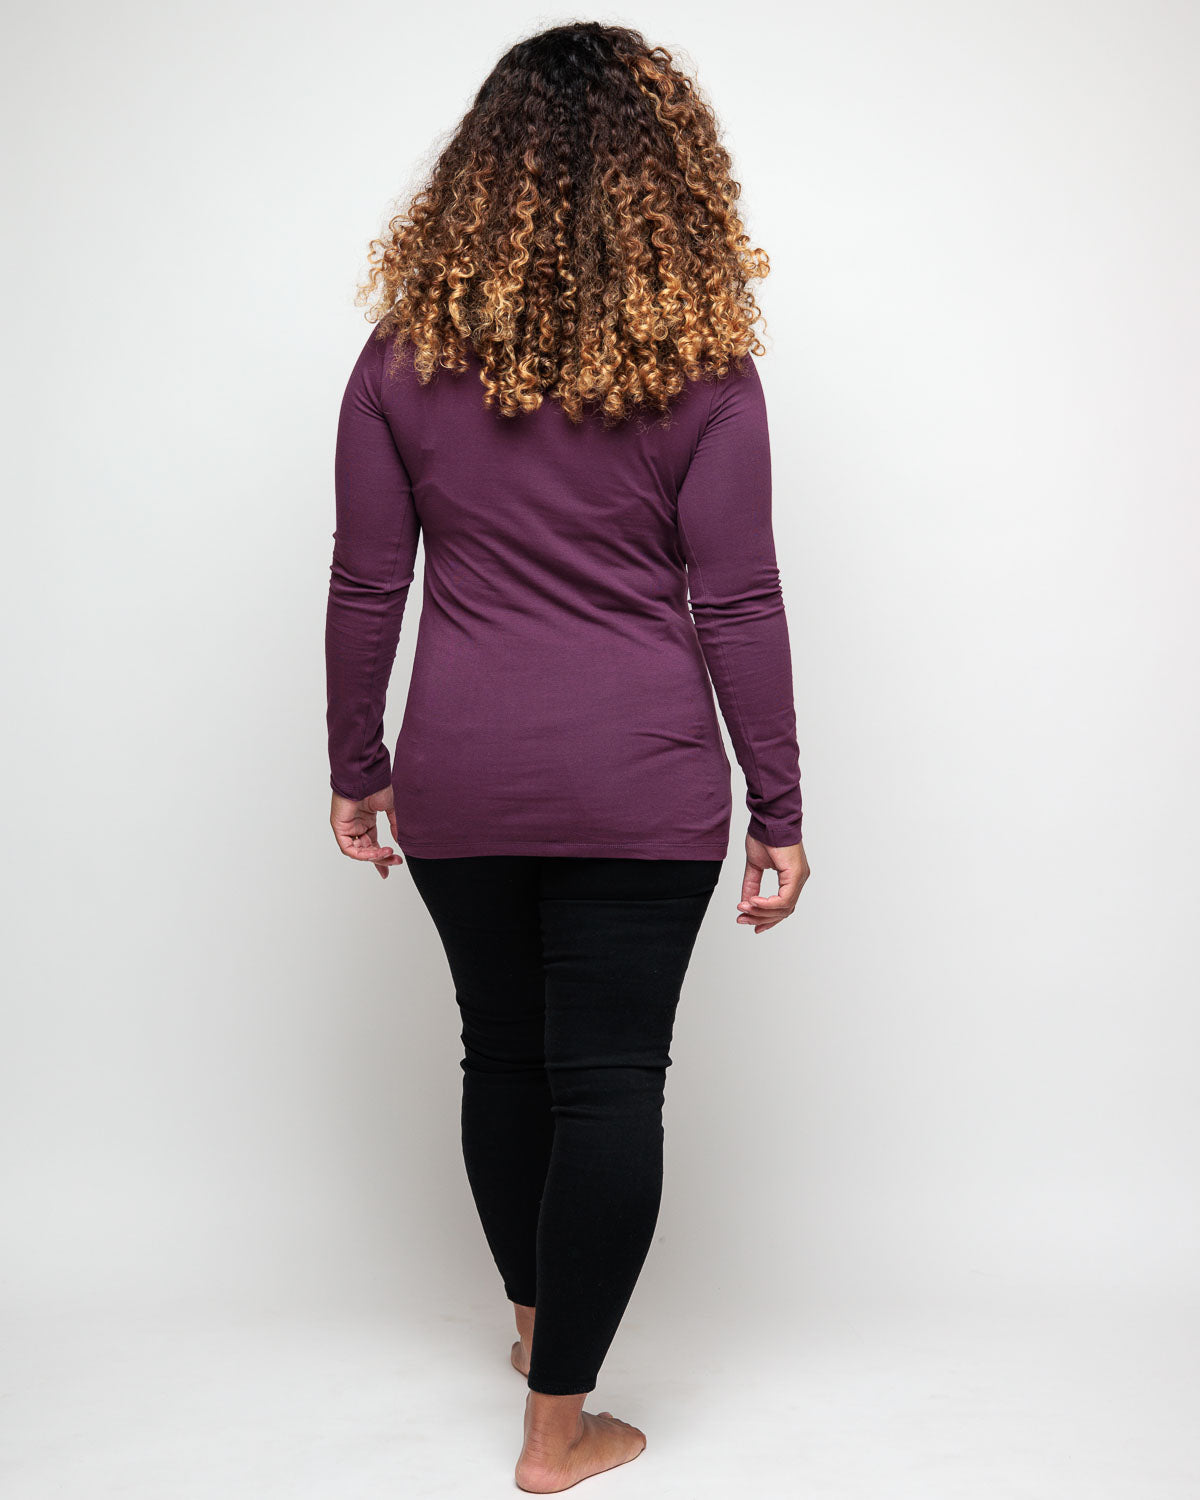 Bshirt Nursing long sleeve t-shirt (with lace) in Plum